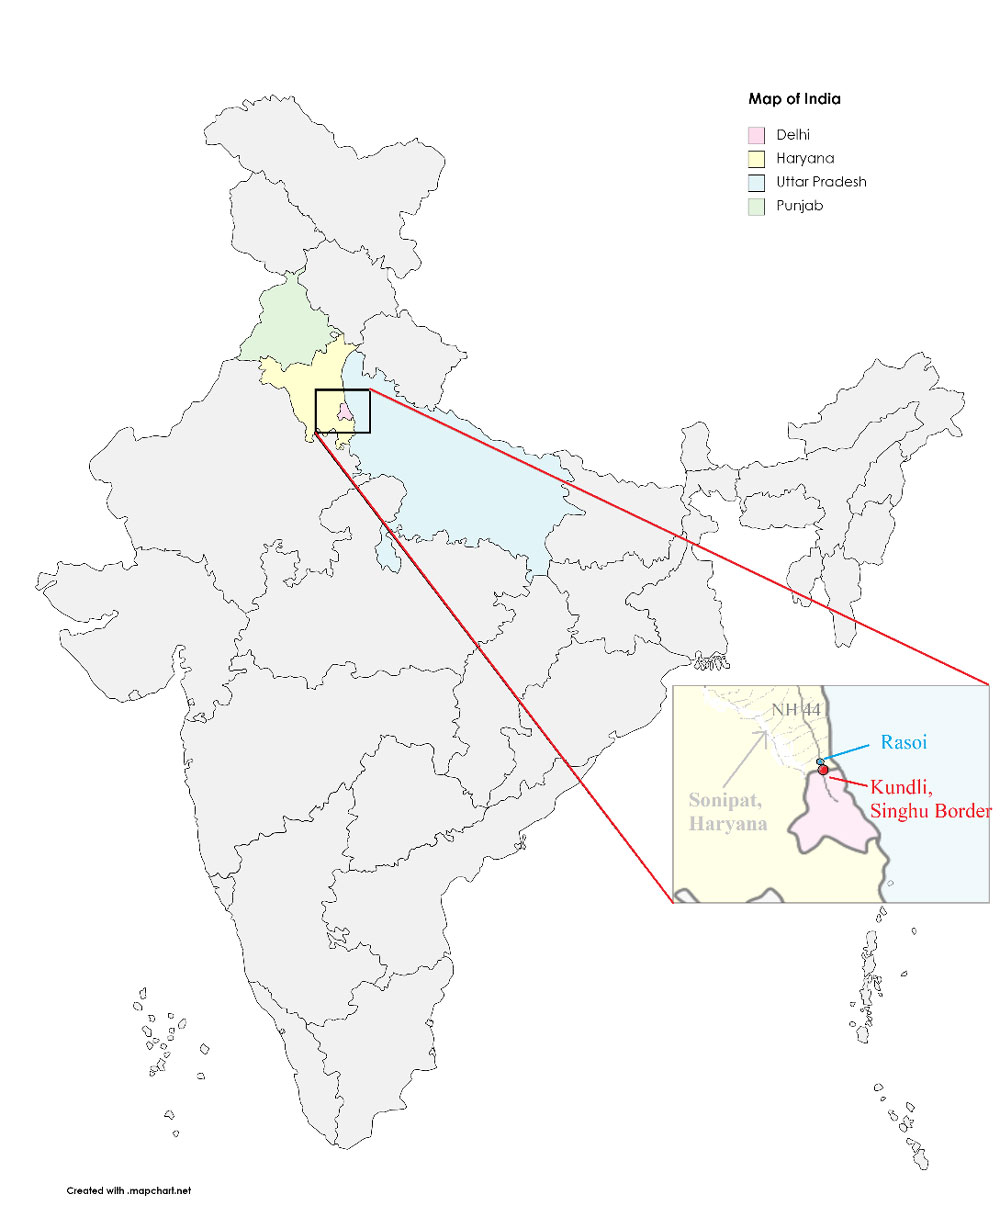 Protest Map of India showing Singhu Border